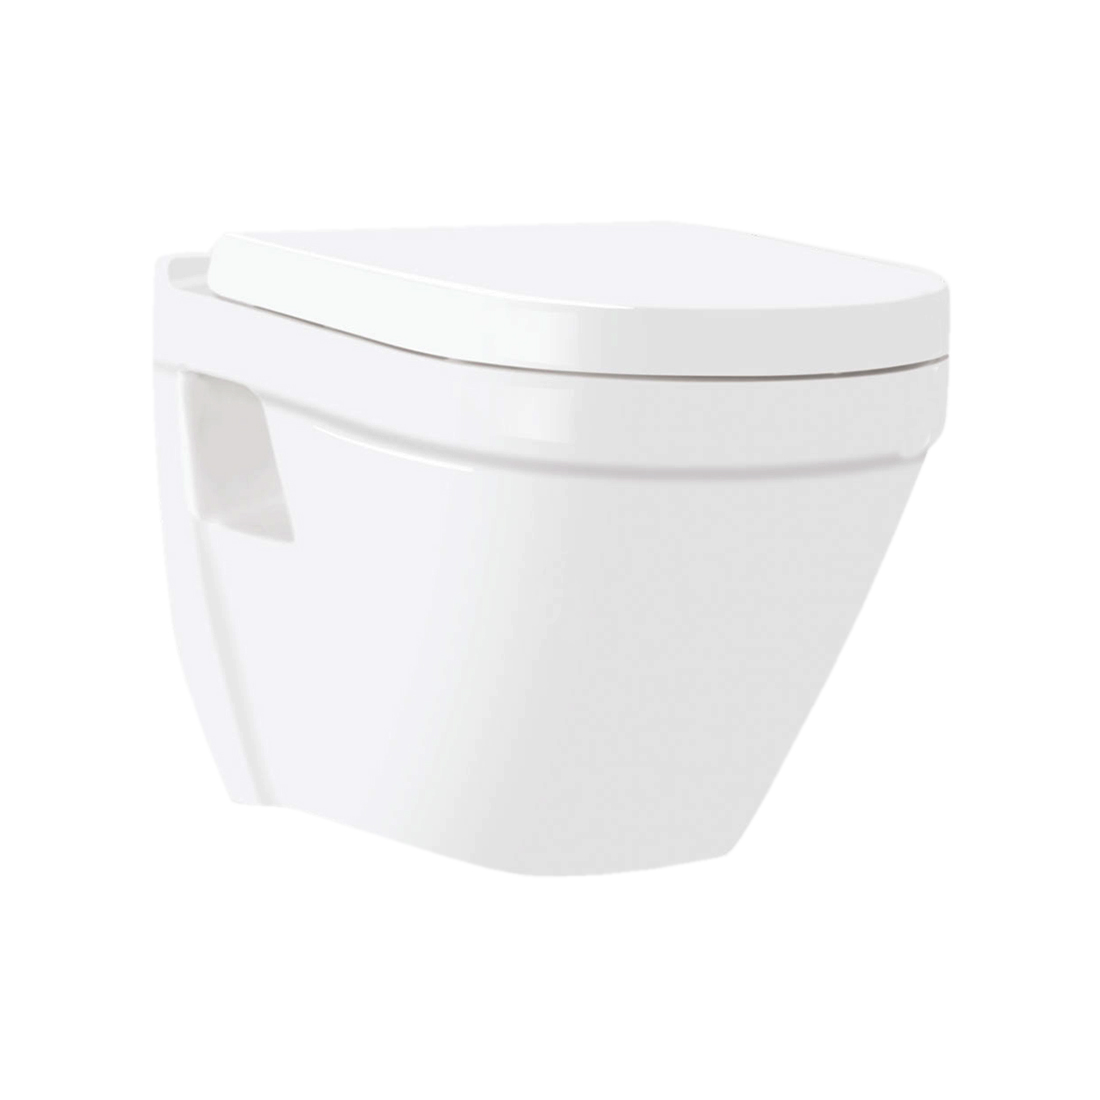 Kerovit Connor KS107 - TR Wall Hung European Water Closet With Seat Cover